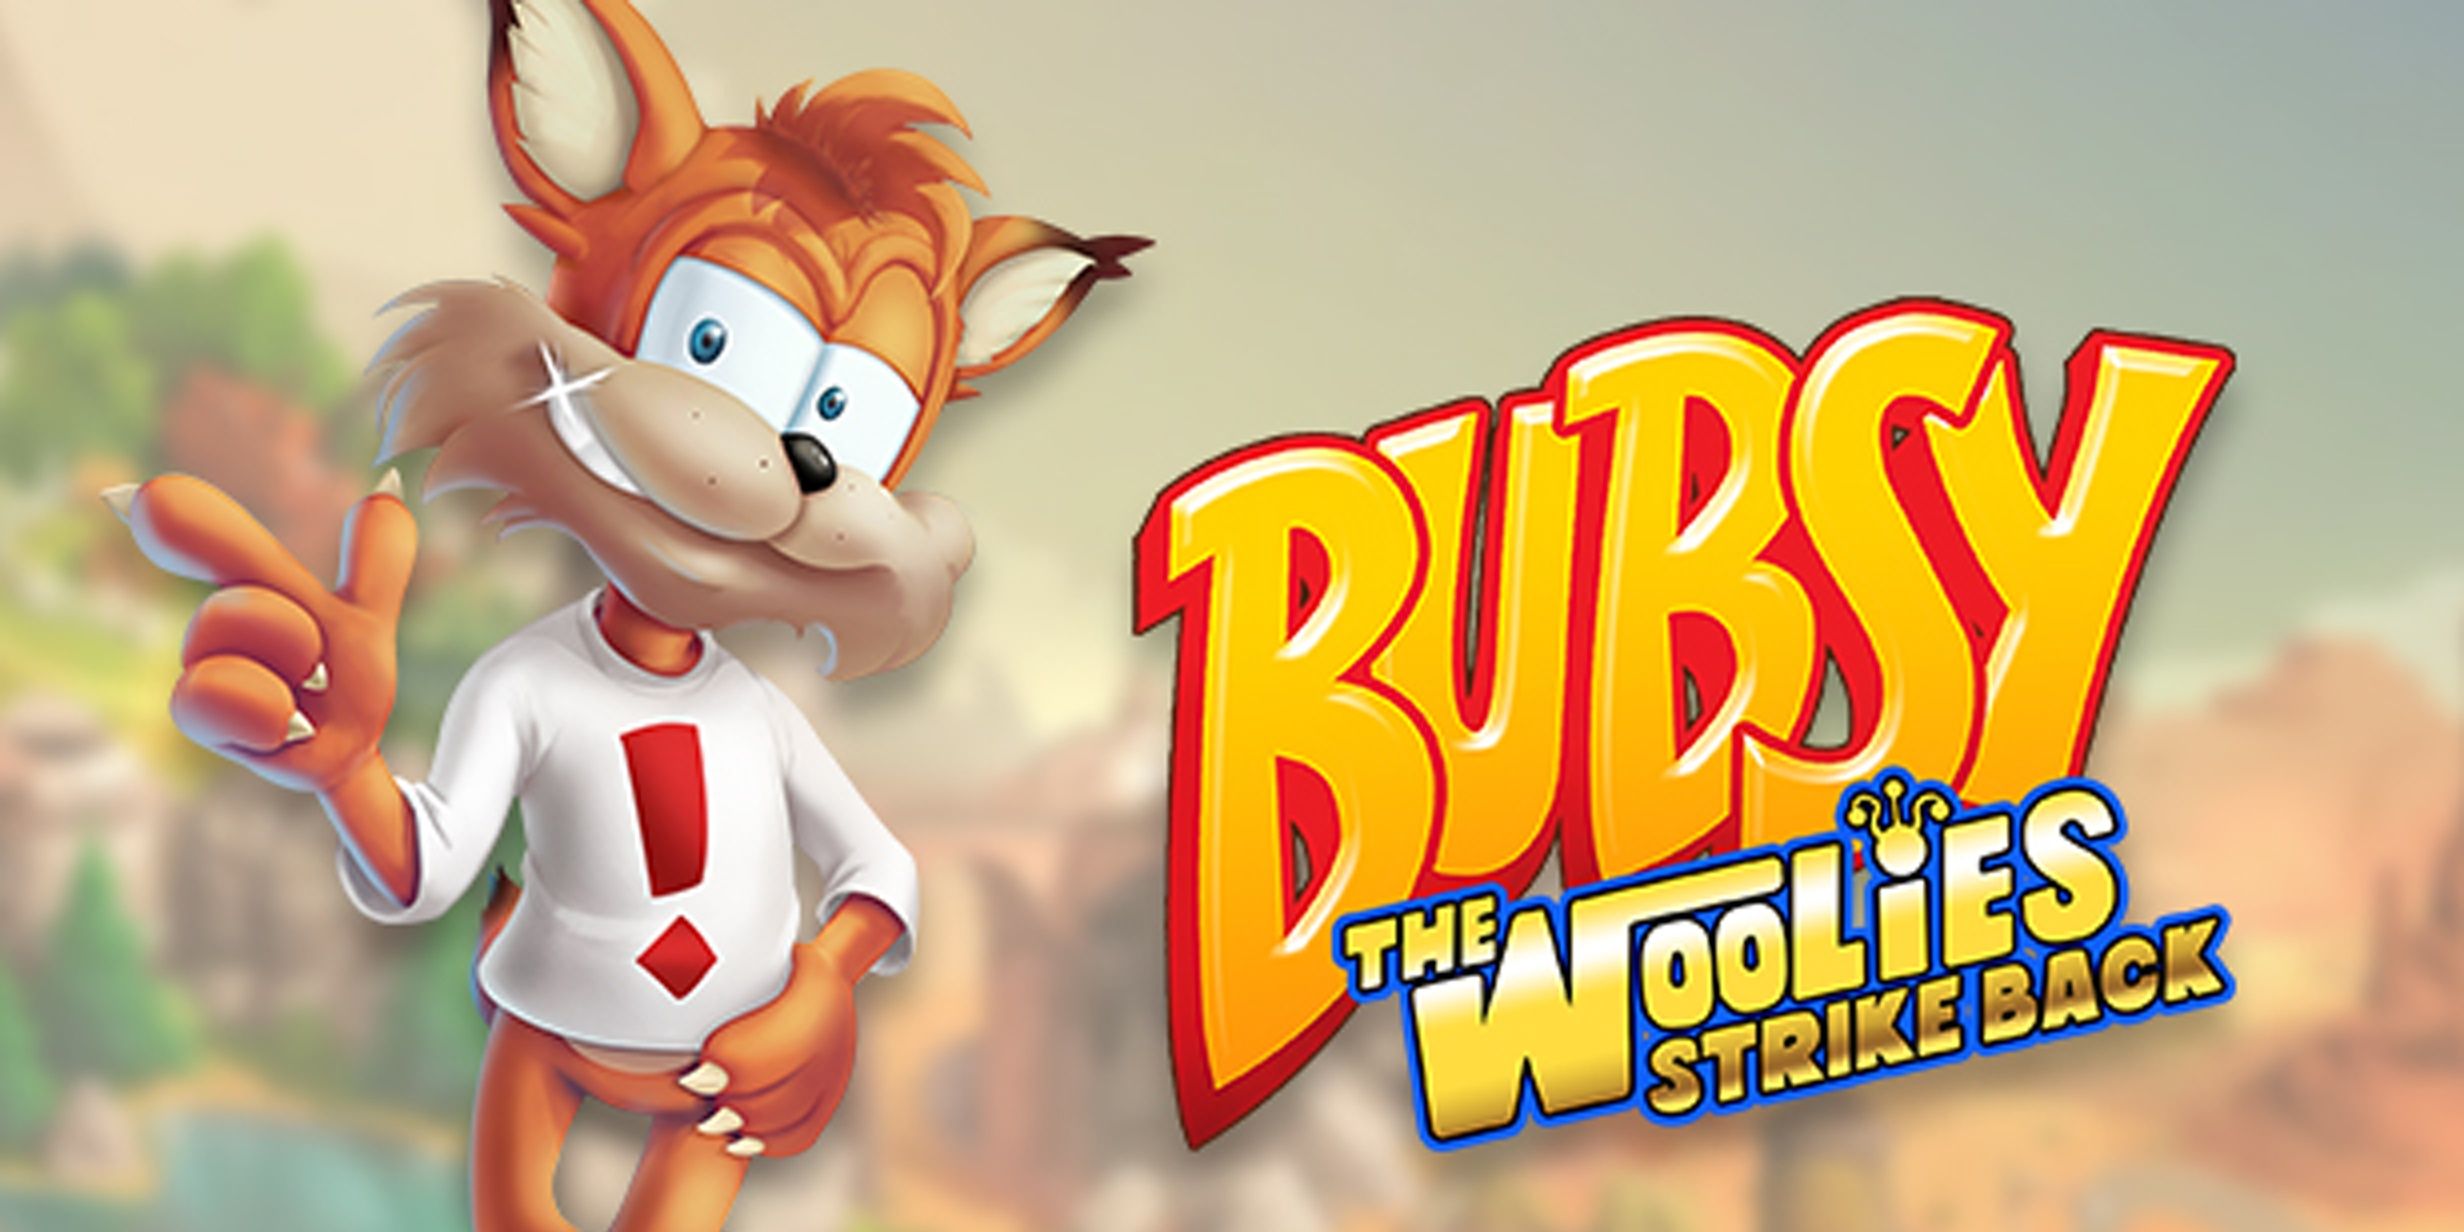 Bubsy The Woolies Strike Back (1) Cropped